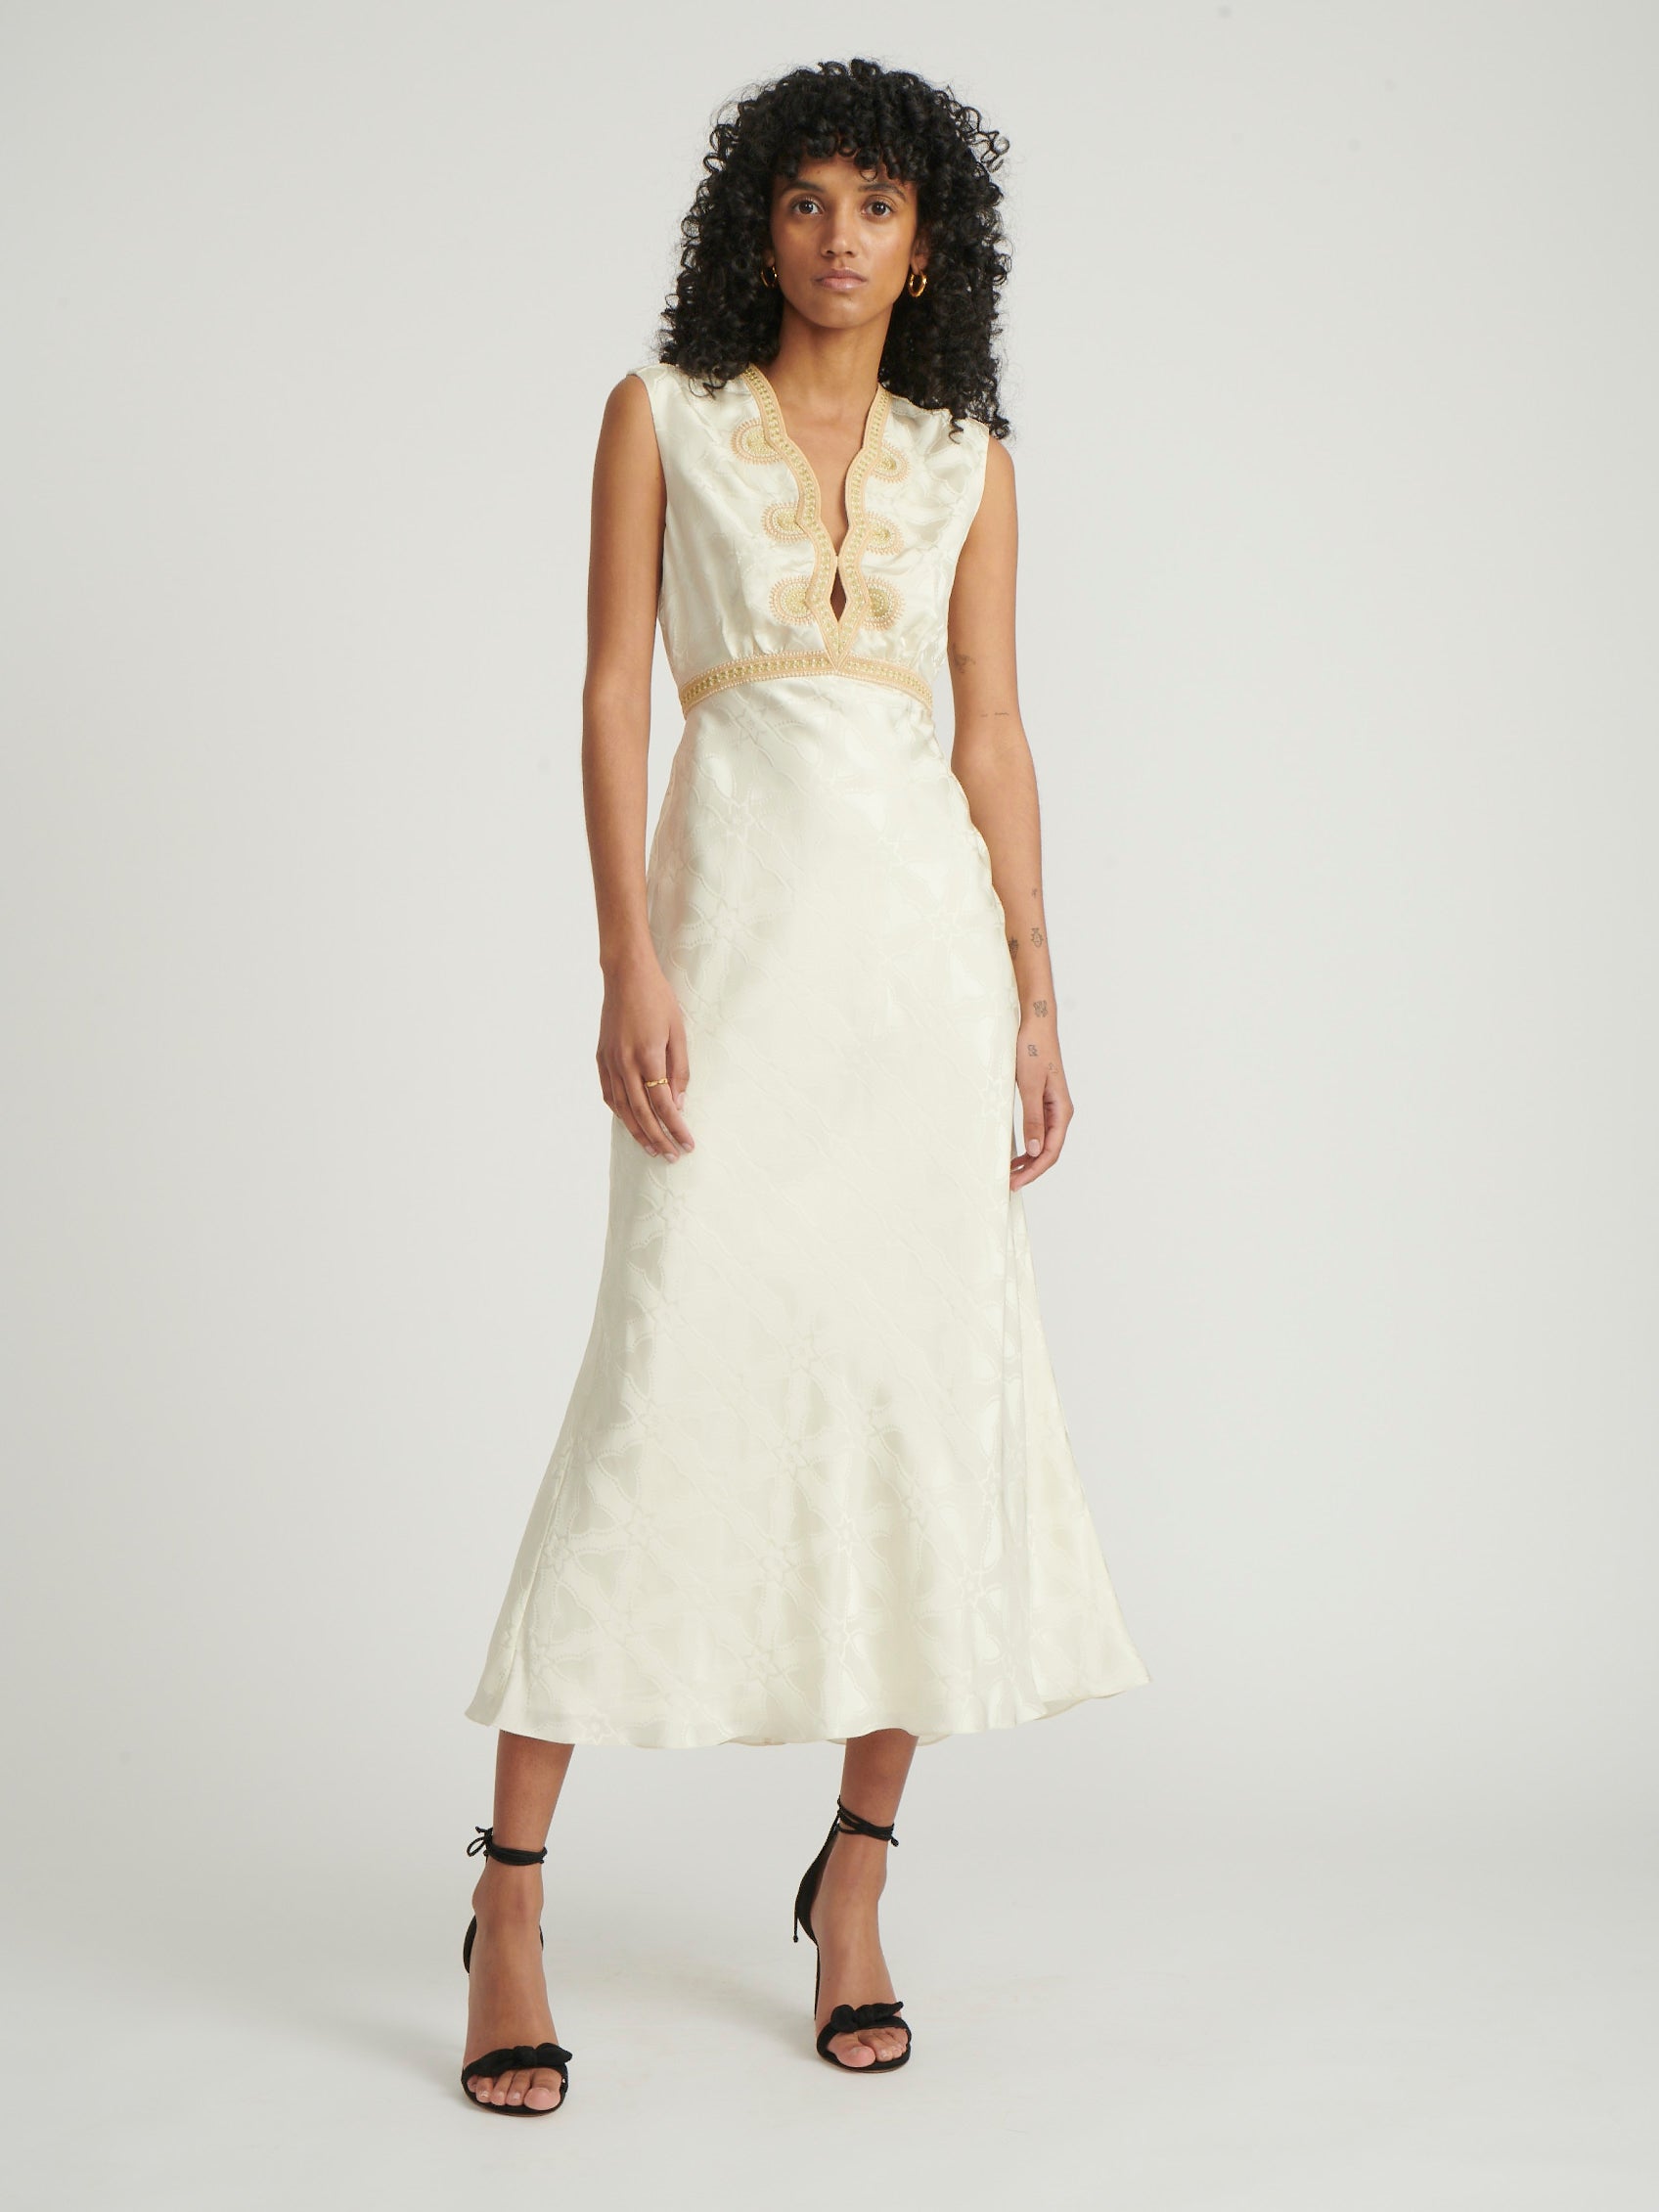 Tabitha B Dress in Tusk with Scallop Embroidery